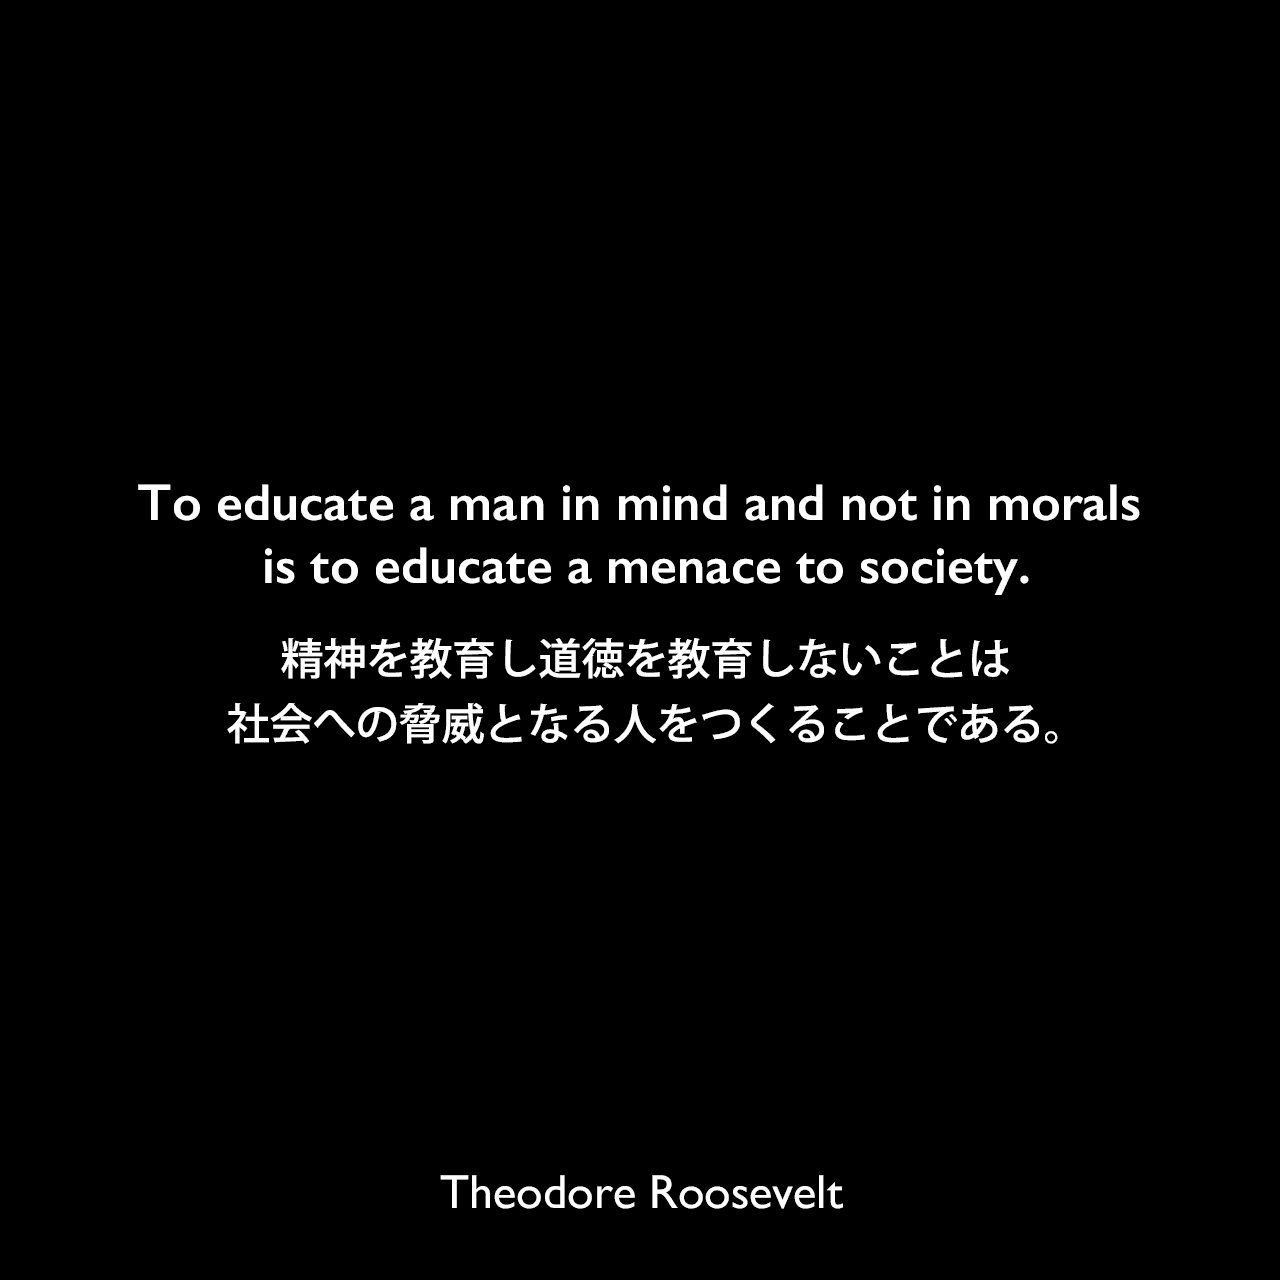 To educate a man in mind and not in morals is to educate a menace to society.精神を教育し道徳を教育しないことは、社会への脅威となる人をつくることである。Theodore Roosevelt